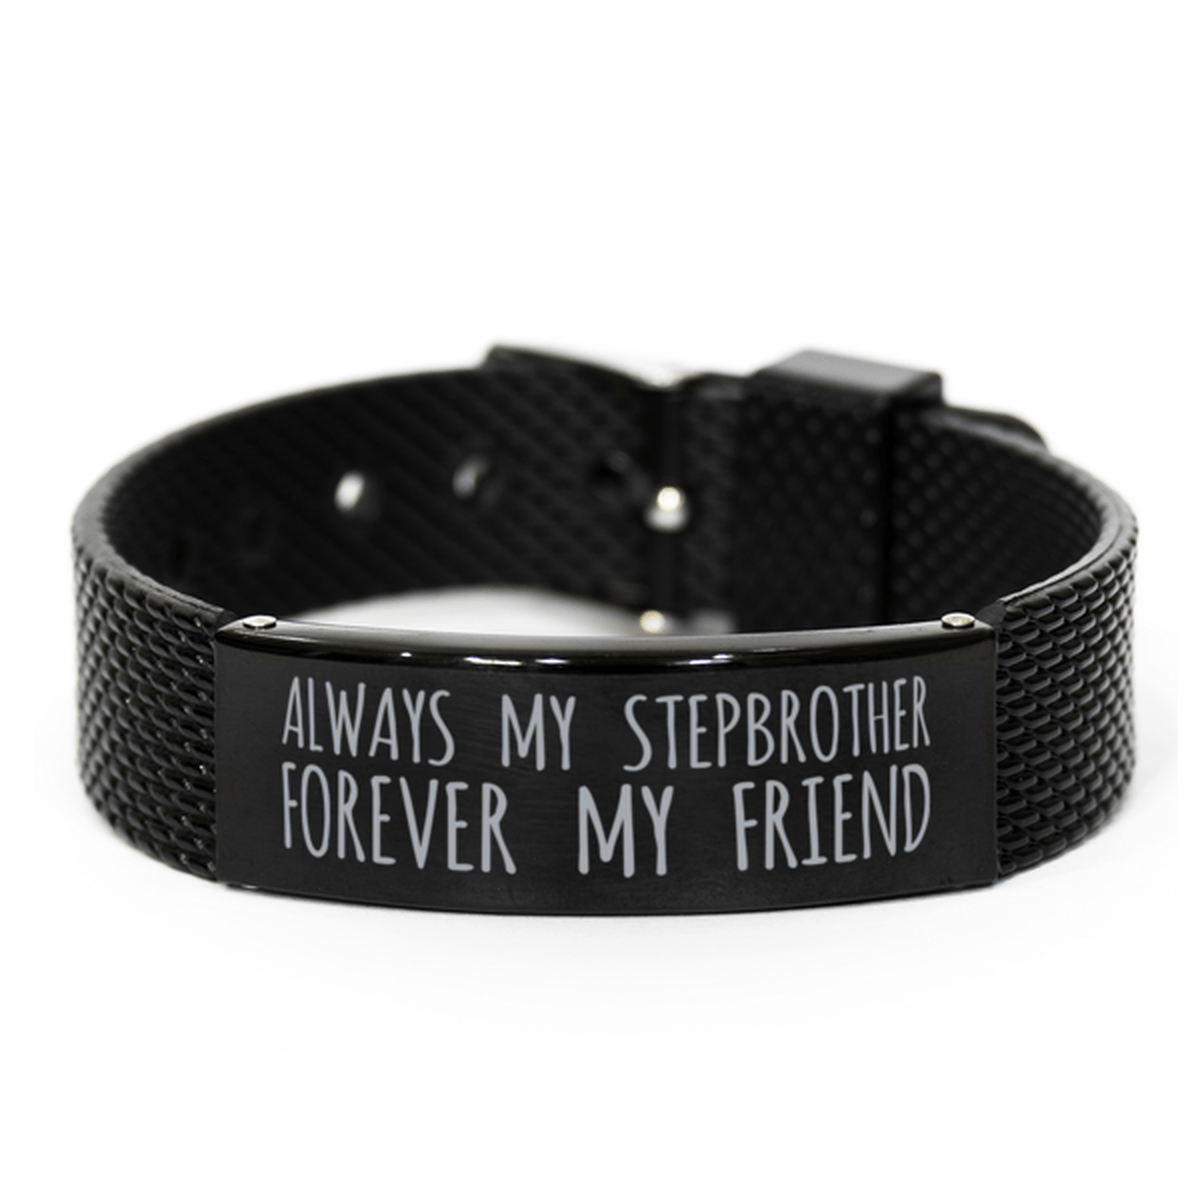 Inspirational Stepbrother Black Shark Mesh Bracelet, Always My Stepbrother Forever My Friend, Best Birthday Gifts for Family Friends